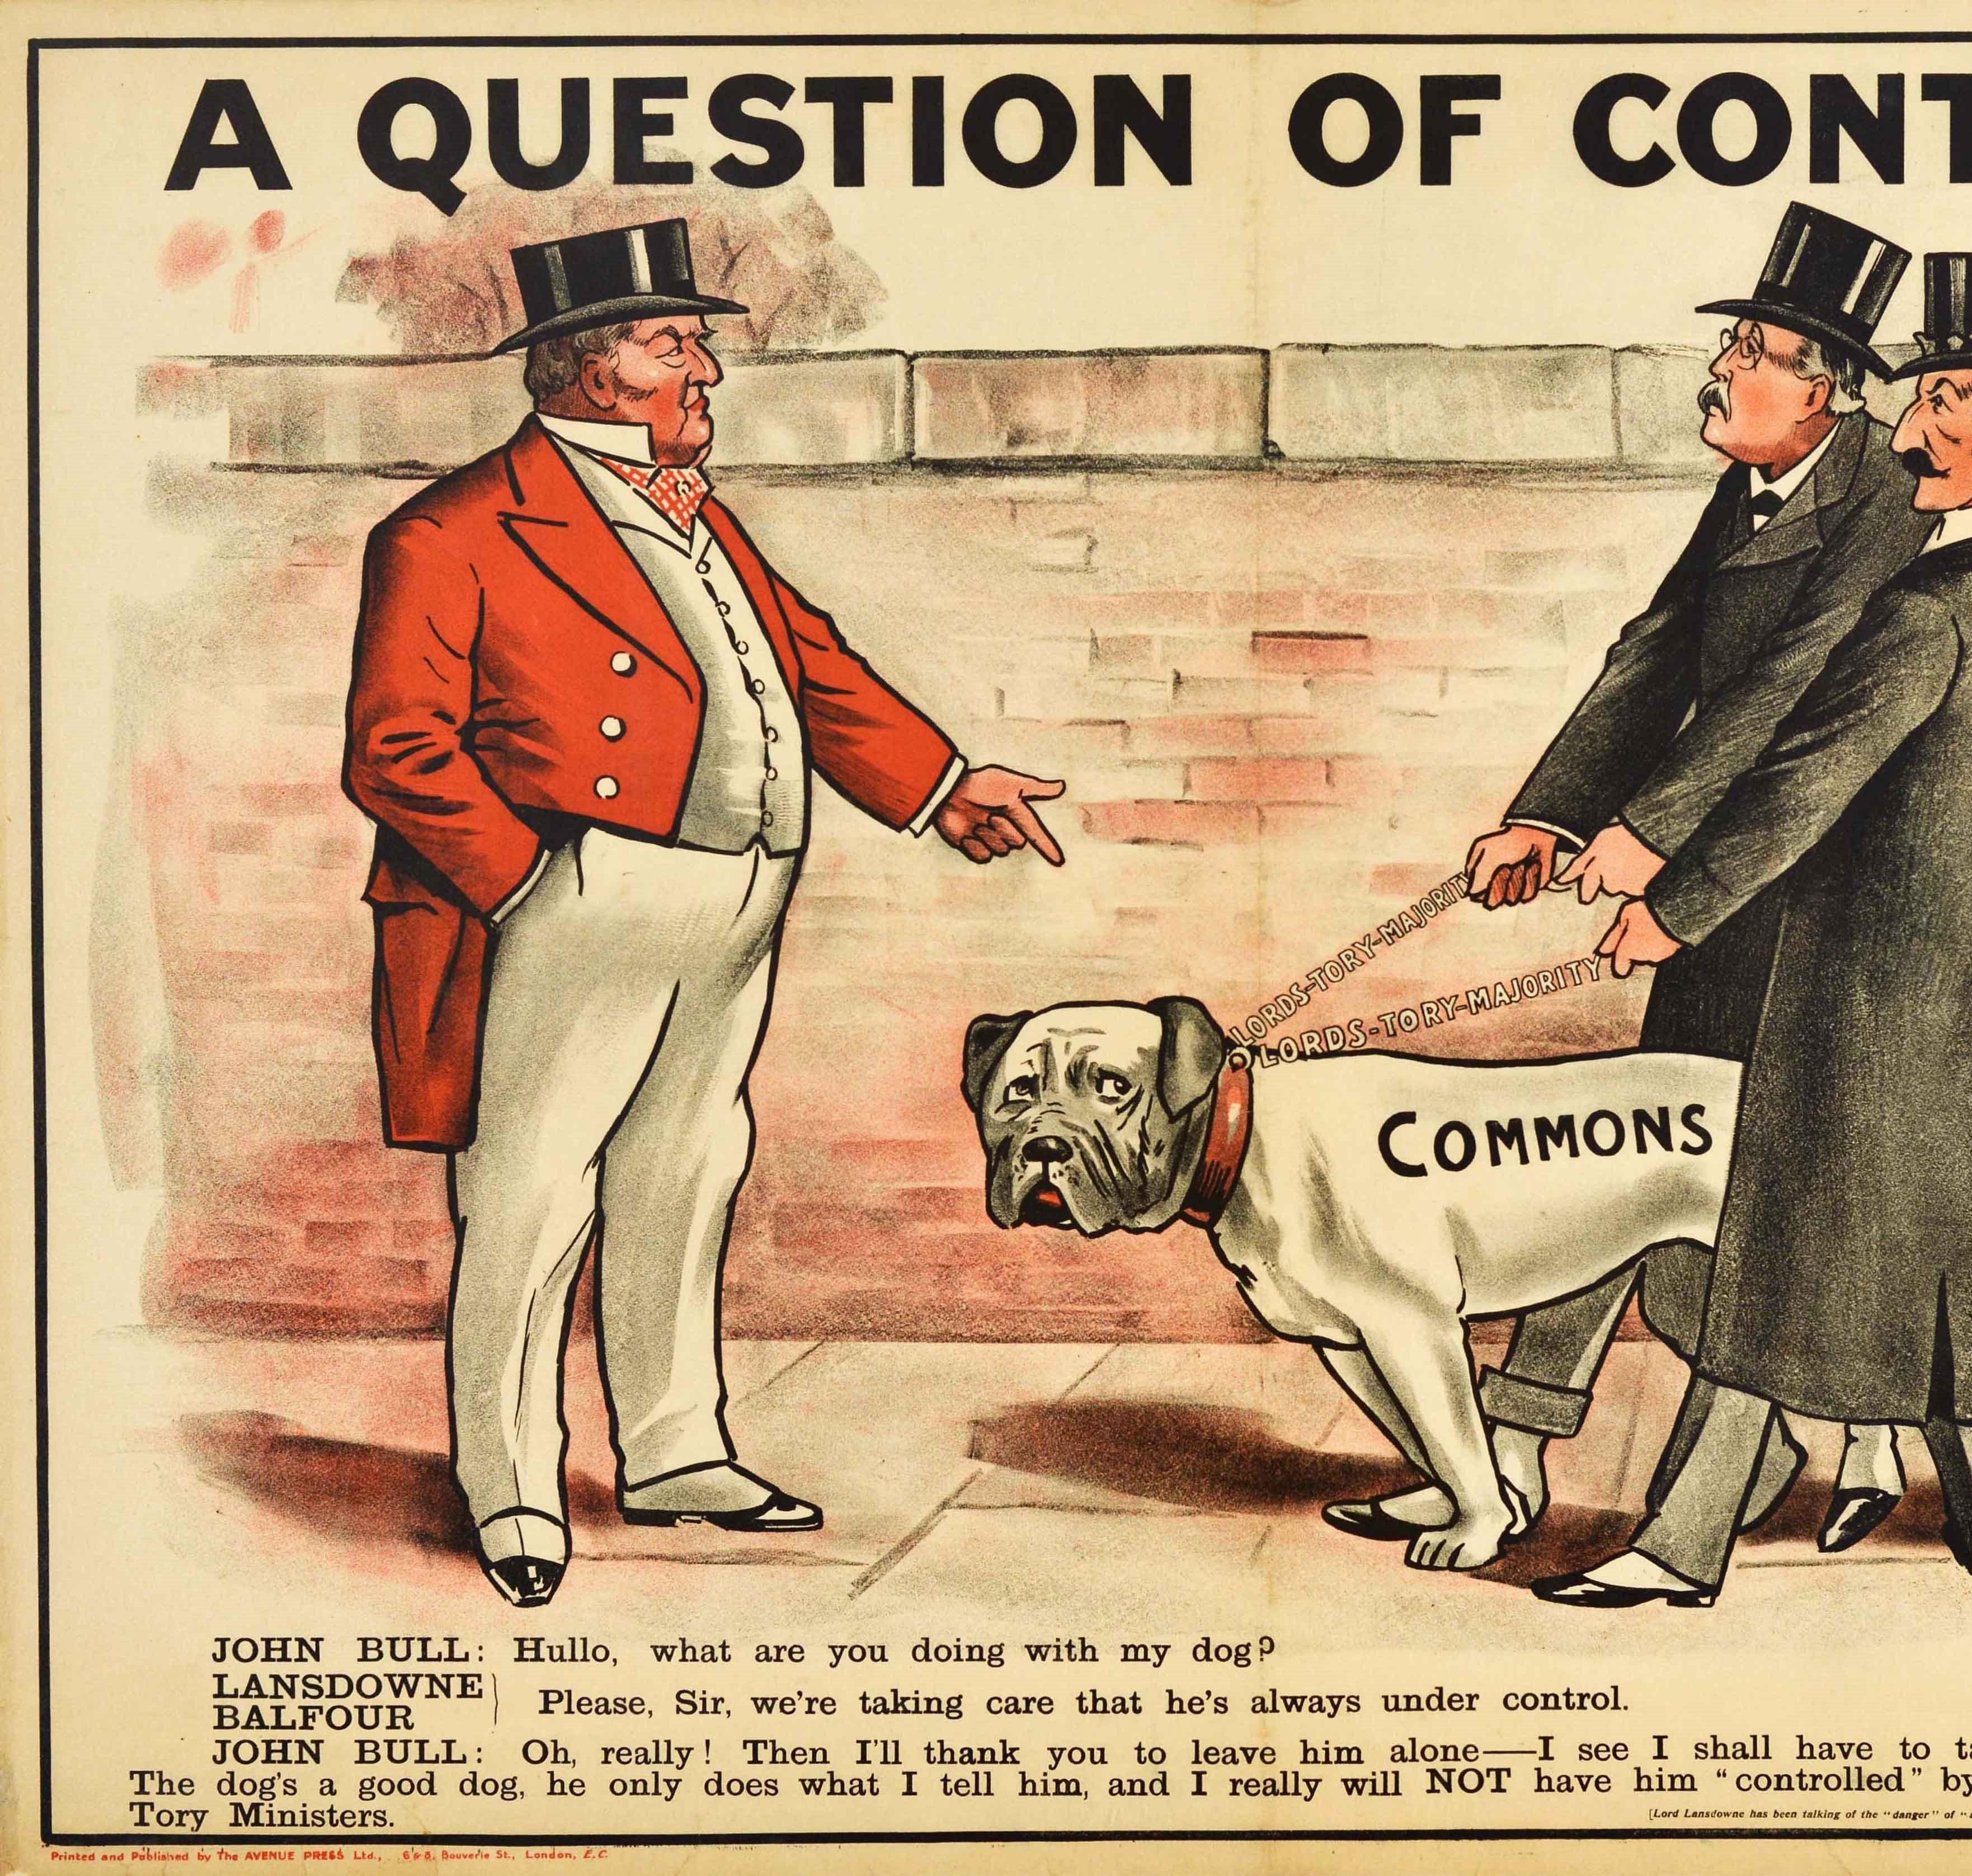 Original antique political election propaganda poster issued by the Liberal Party - A Question Of Control - featuring an illustration of John Bull wearing a red jacket and top hat stopping the British statesman Henry Petty-Fitzmaurice 5th Marquess